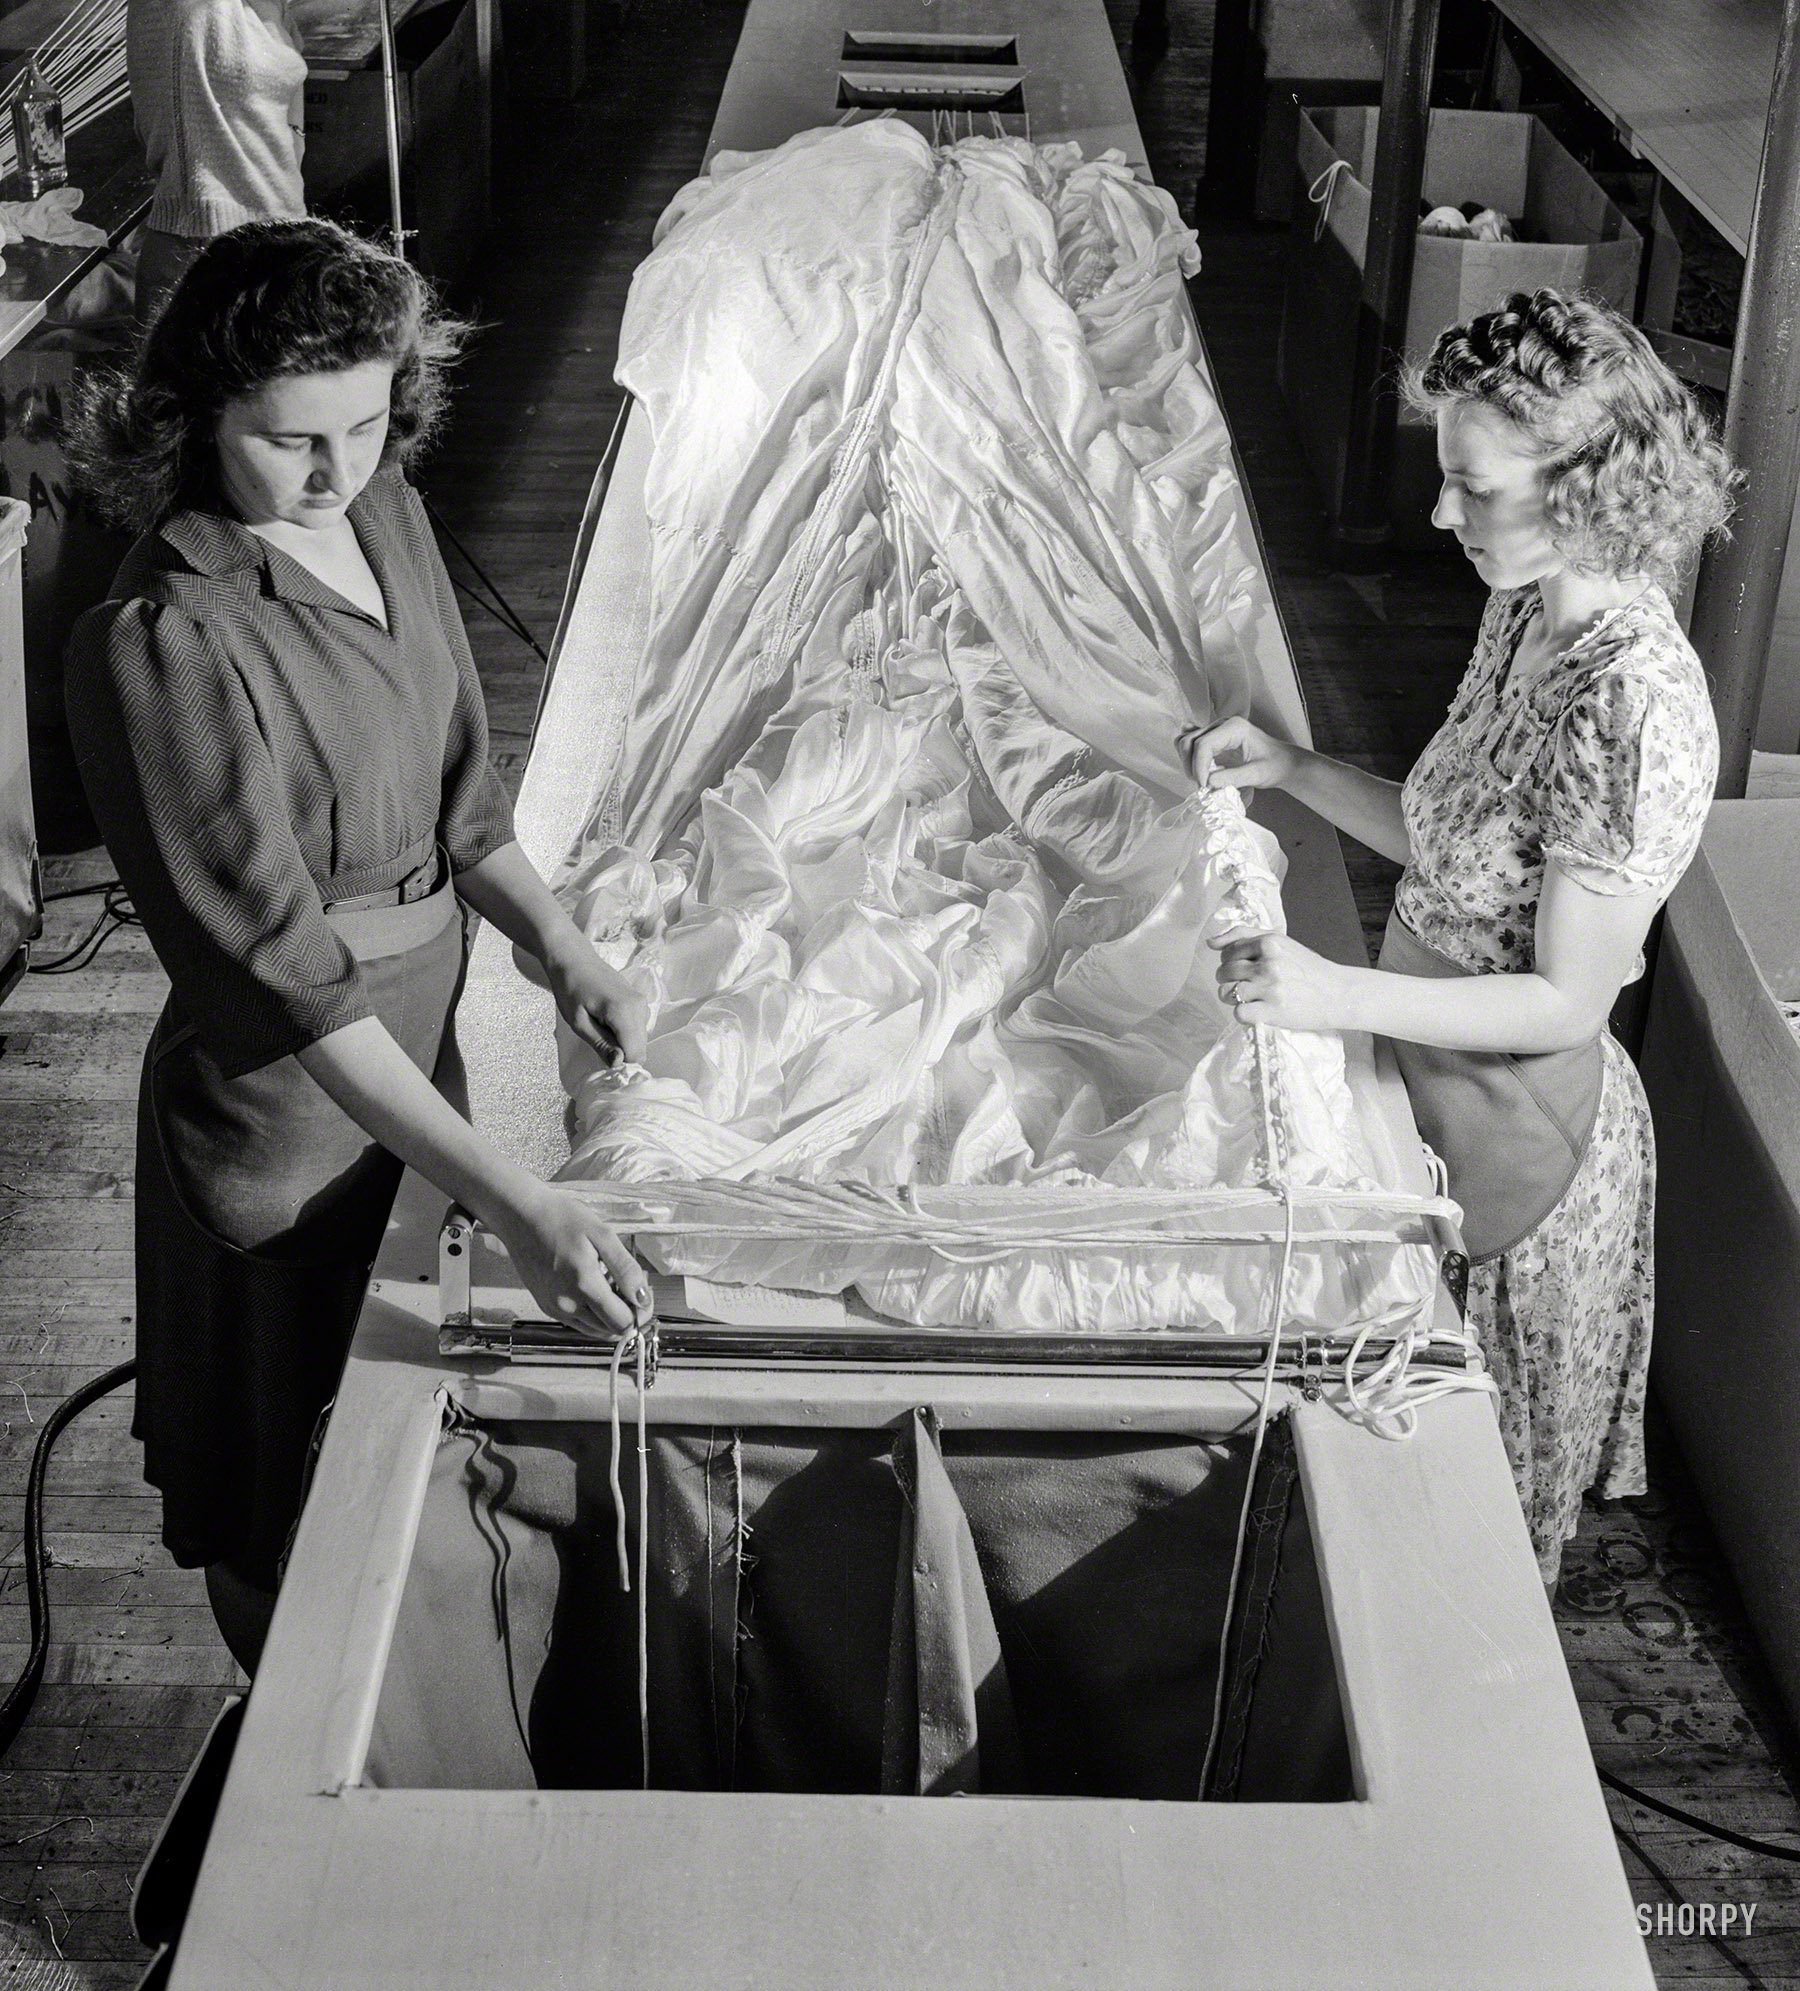 August 1942. "Production. Parachute making. As these two girls thread shroud cords through the material, these yards of silk become more nearly recognizable as one of the parachutes turned out by this Eastern plant. Pioneer Parachute Company, Manchester, Connecticut." Photo by William Rittase for the Office of War Information. View full size.